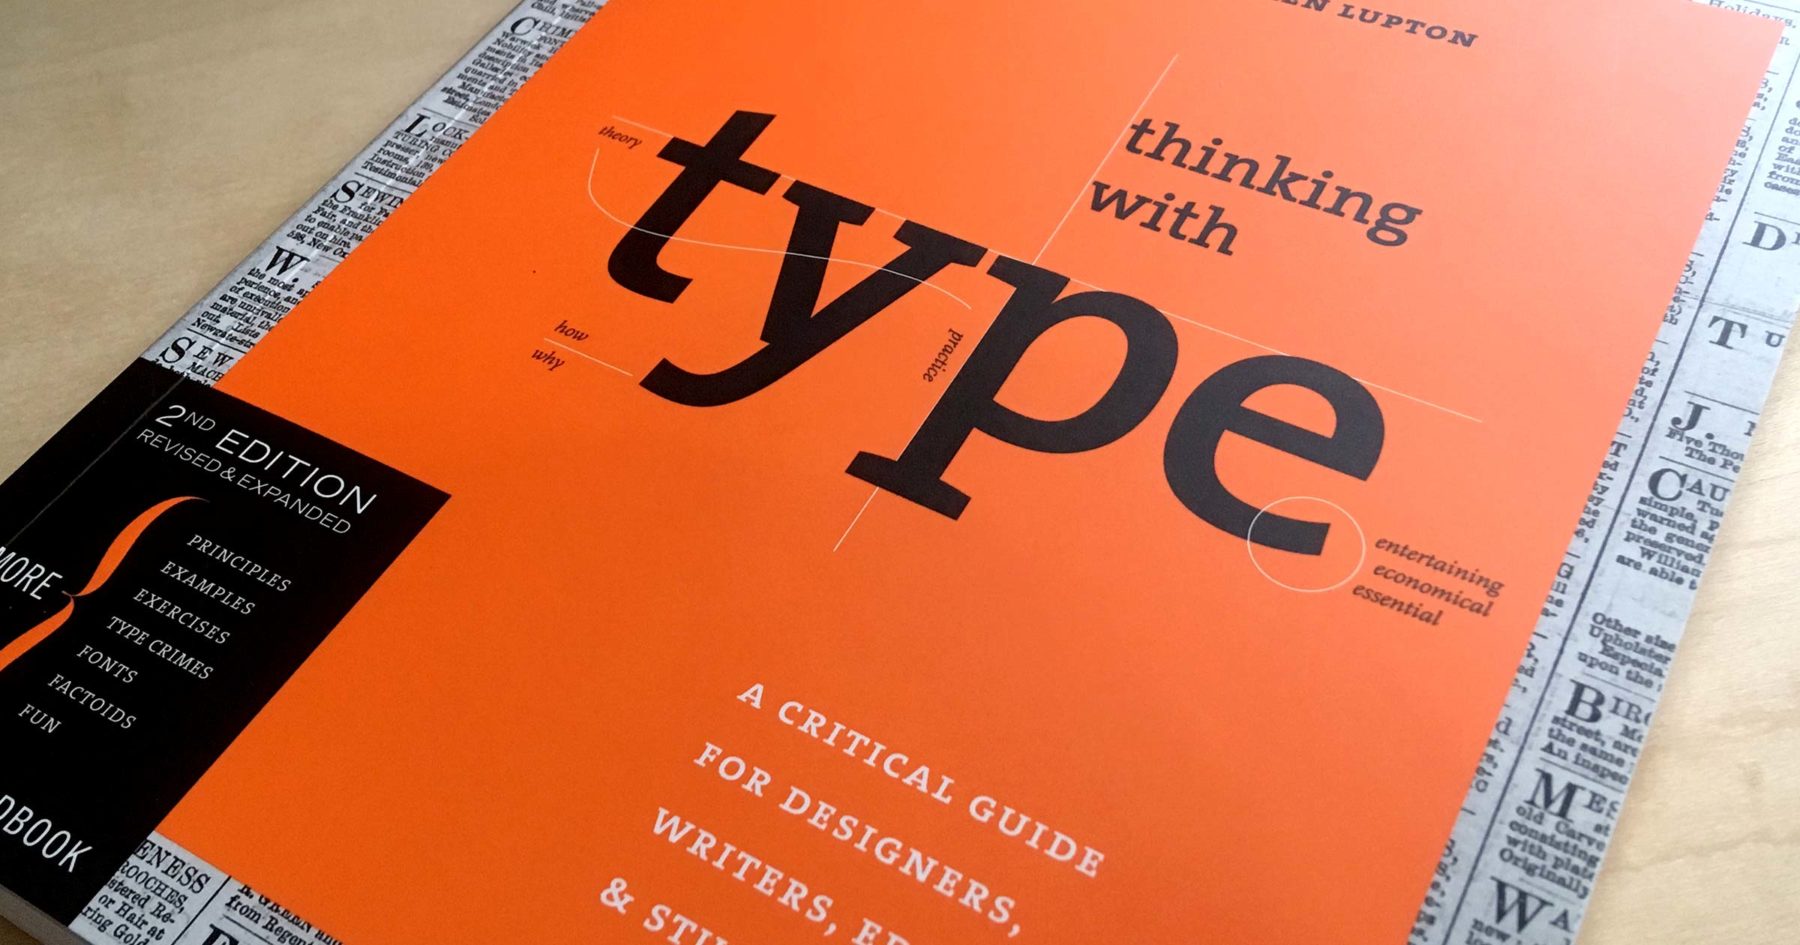 thinking with type ellen lupton 2nd edition